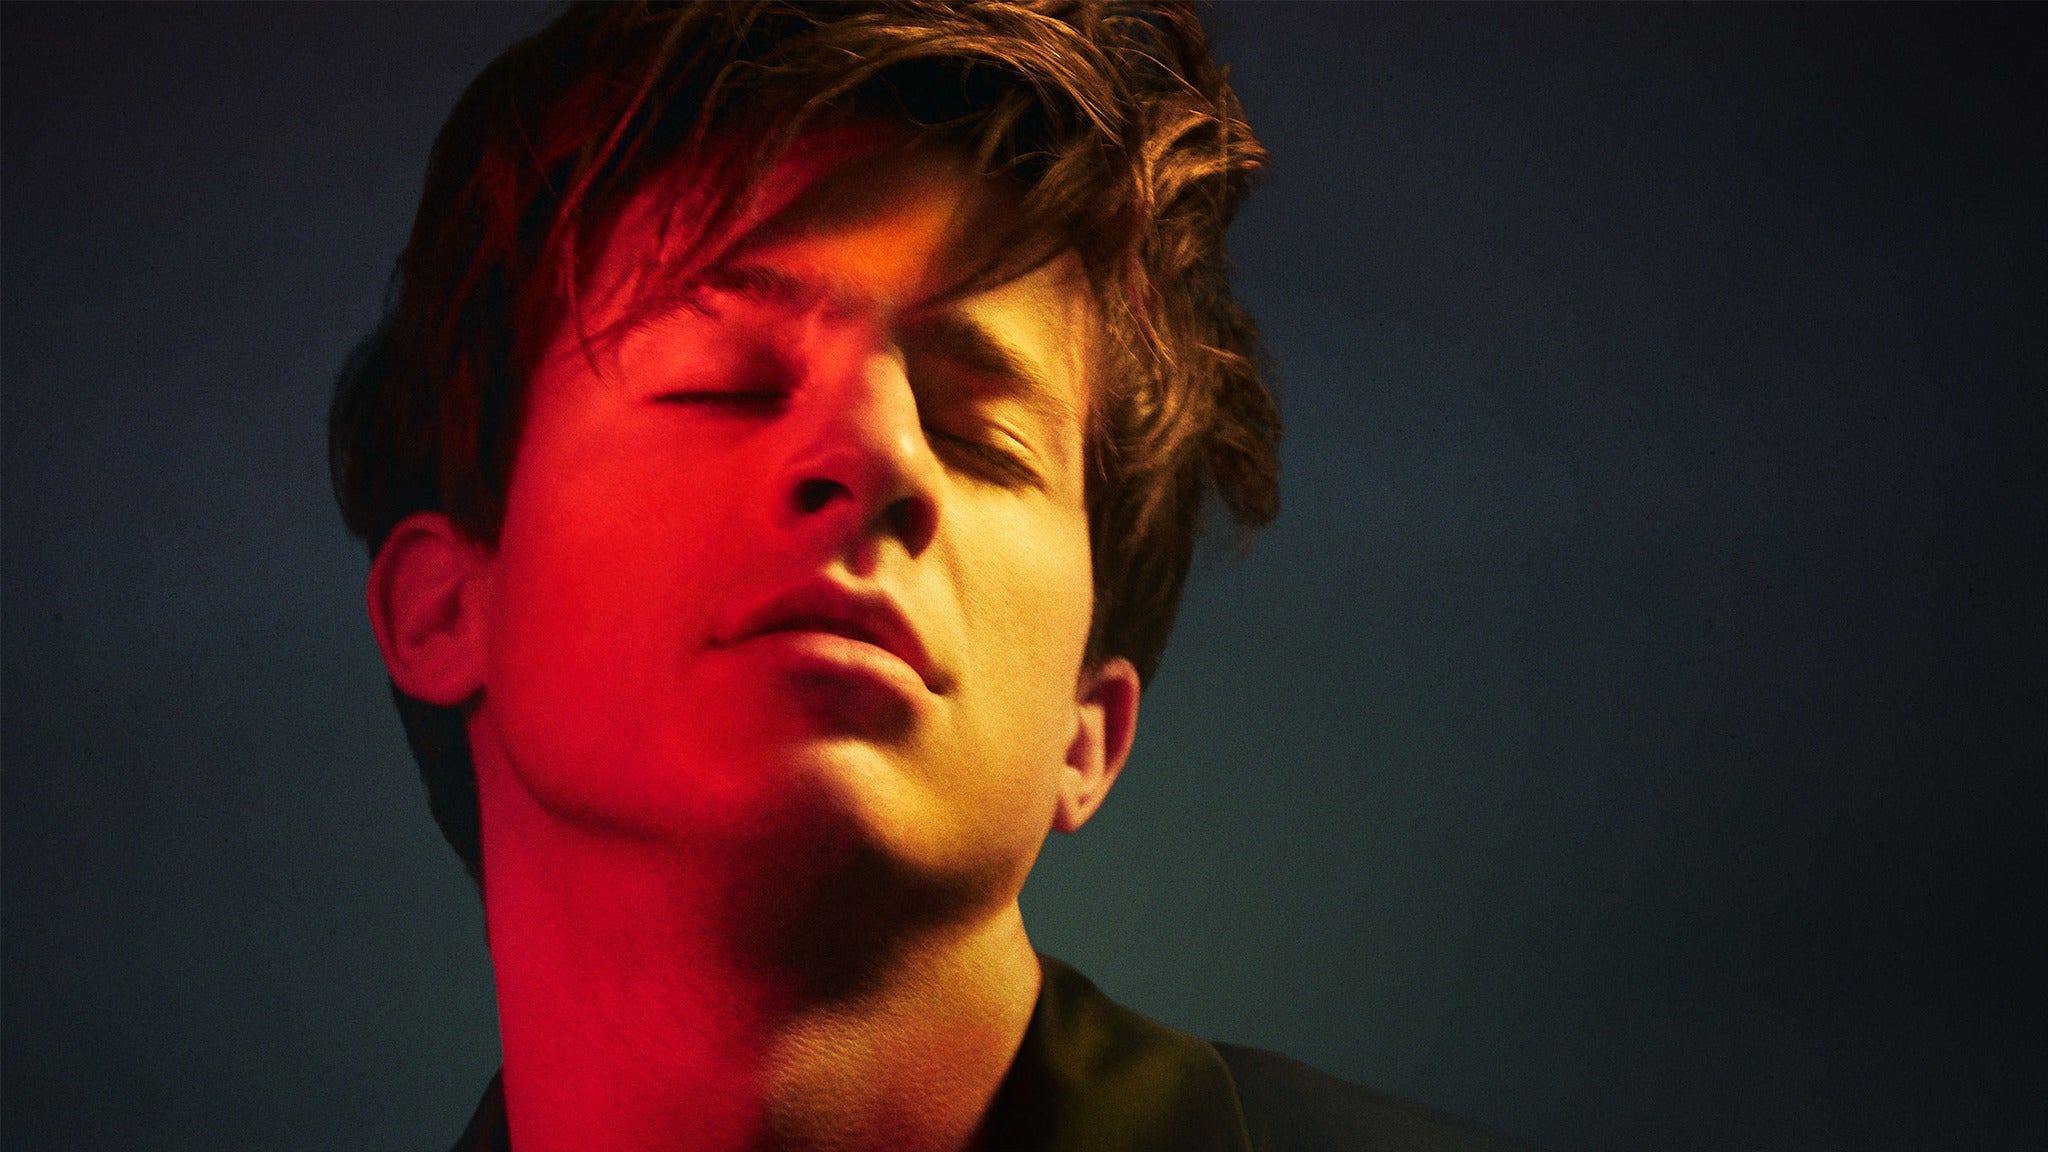 2018 Honda Civic Tour presents Charlie Puth Voicenotes in Albuquerque promo photo for VIP Package presale offer code